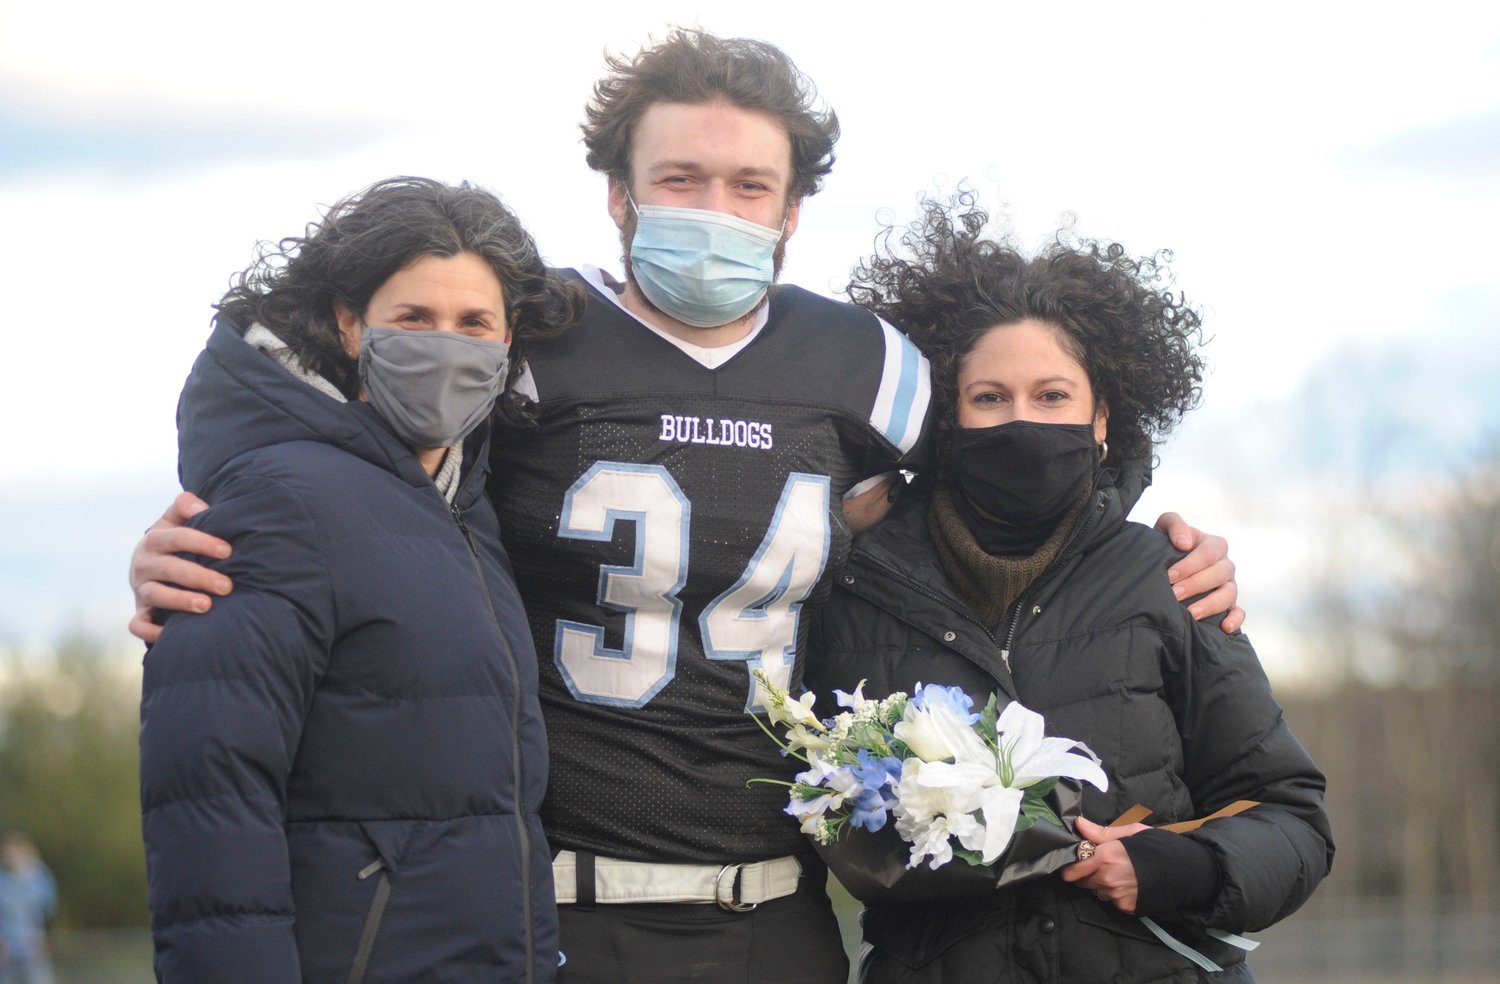 Home is where the hearts are. Jason Gaebel was one of the five Bulldogs seniors honored during Sullivan West’s homecoming football game. He is pictured with Jennifer Bitetto and his proud mom, Danielle Gaebel.